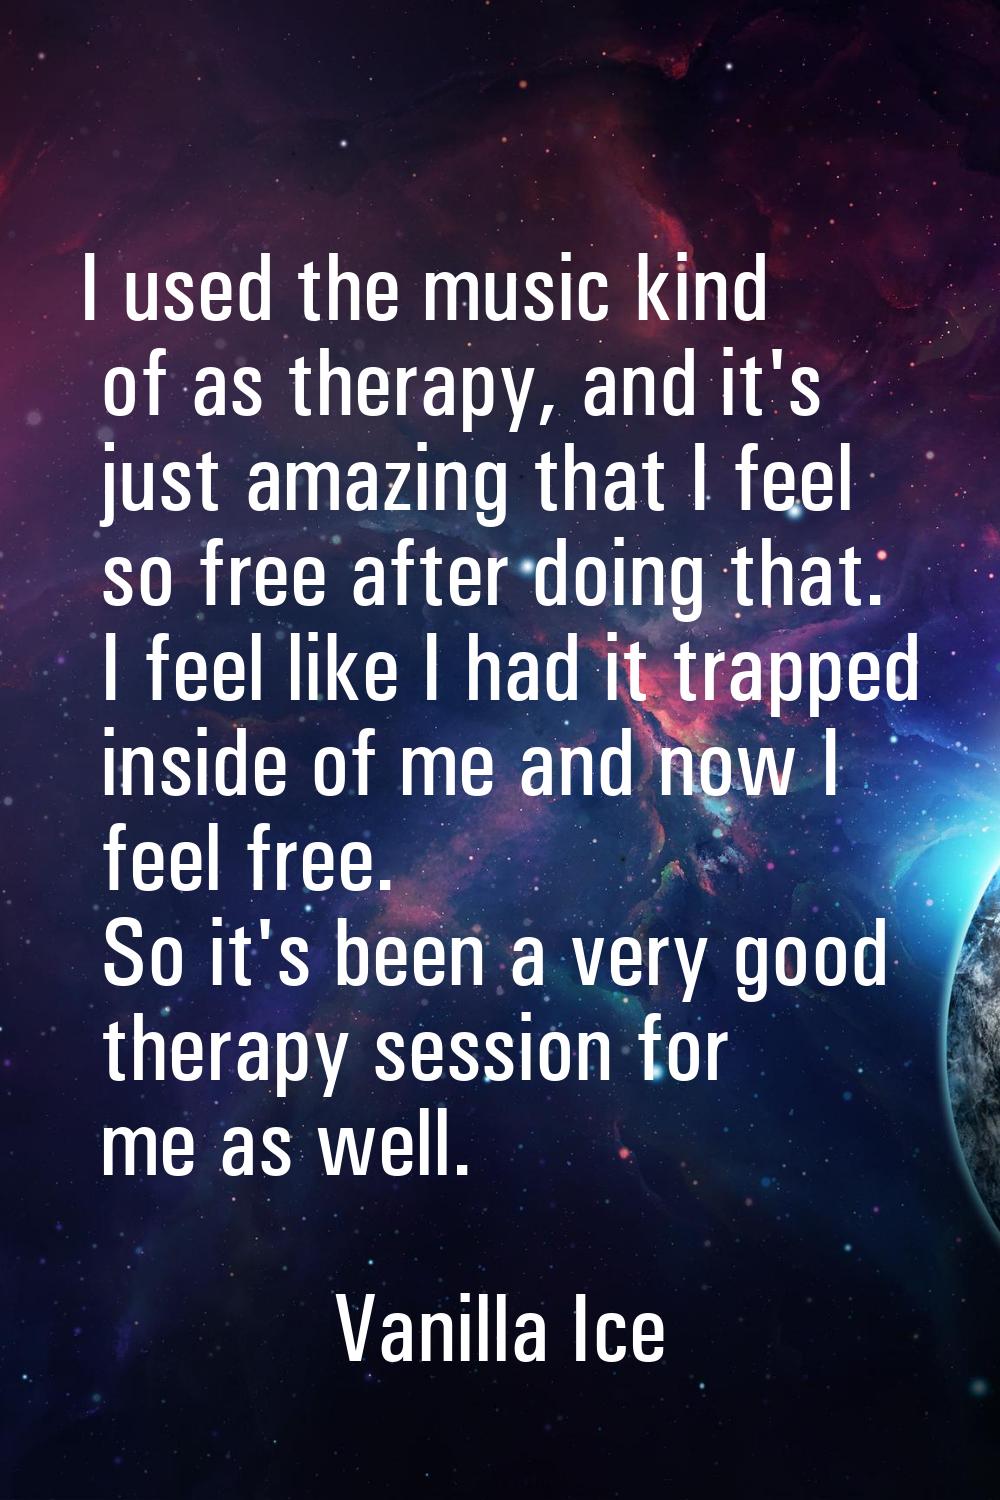 I used the music kind of as therapy, and it's just amazing that I feel so free after doing that. I 